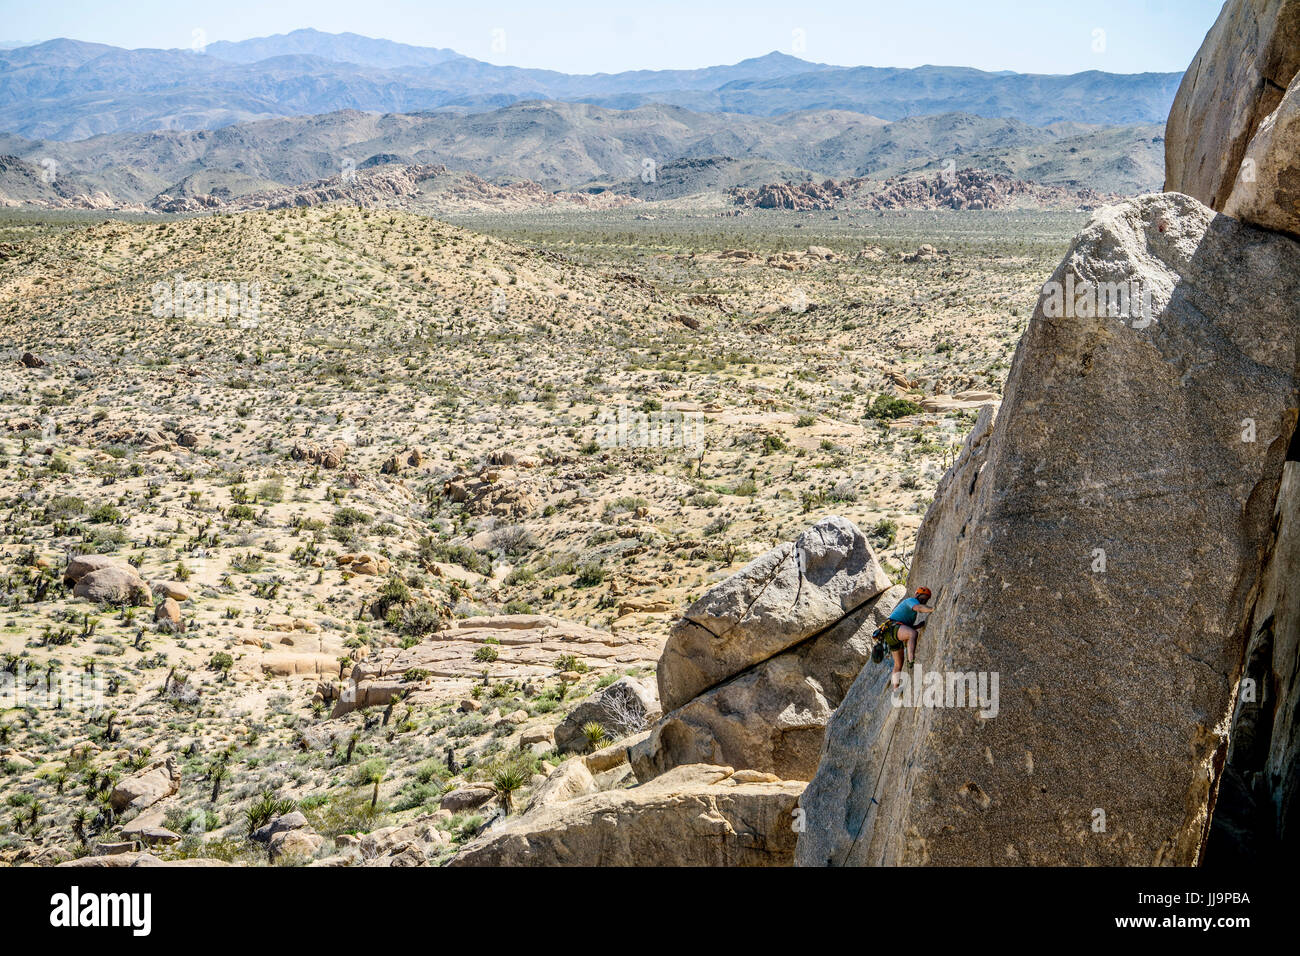 A man lead climbing a route in Joshua Tree National Park. Stock Photo